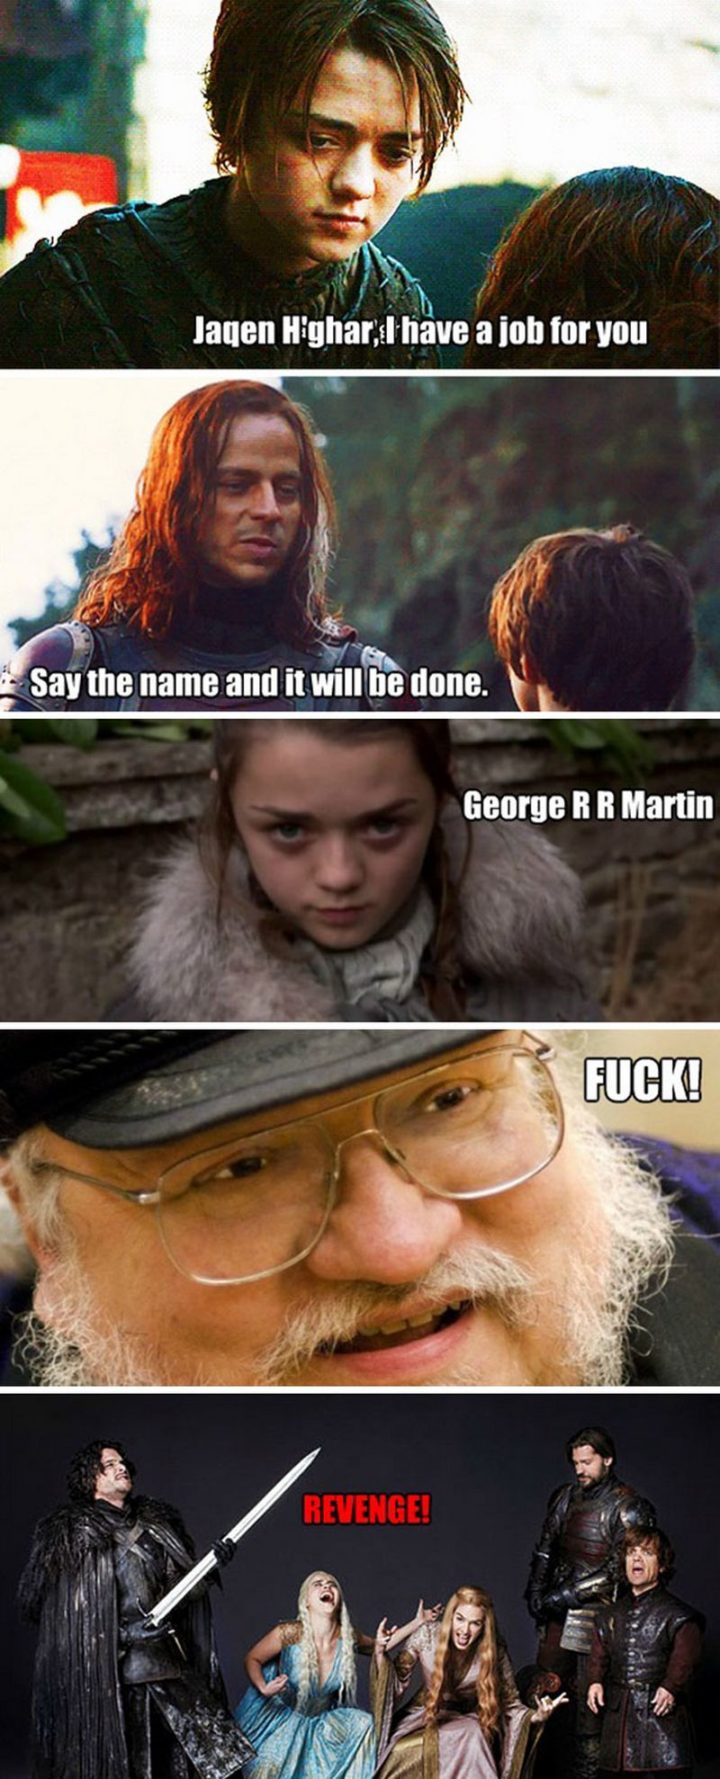 "Jaqen H'ghar, I have a job for you. Say the name and it will be done. George R. R. Martin. F***! Revenge!"